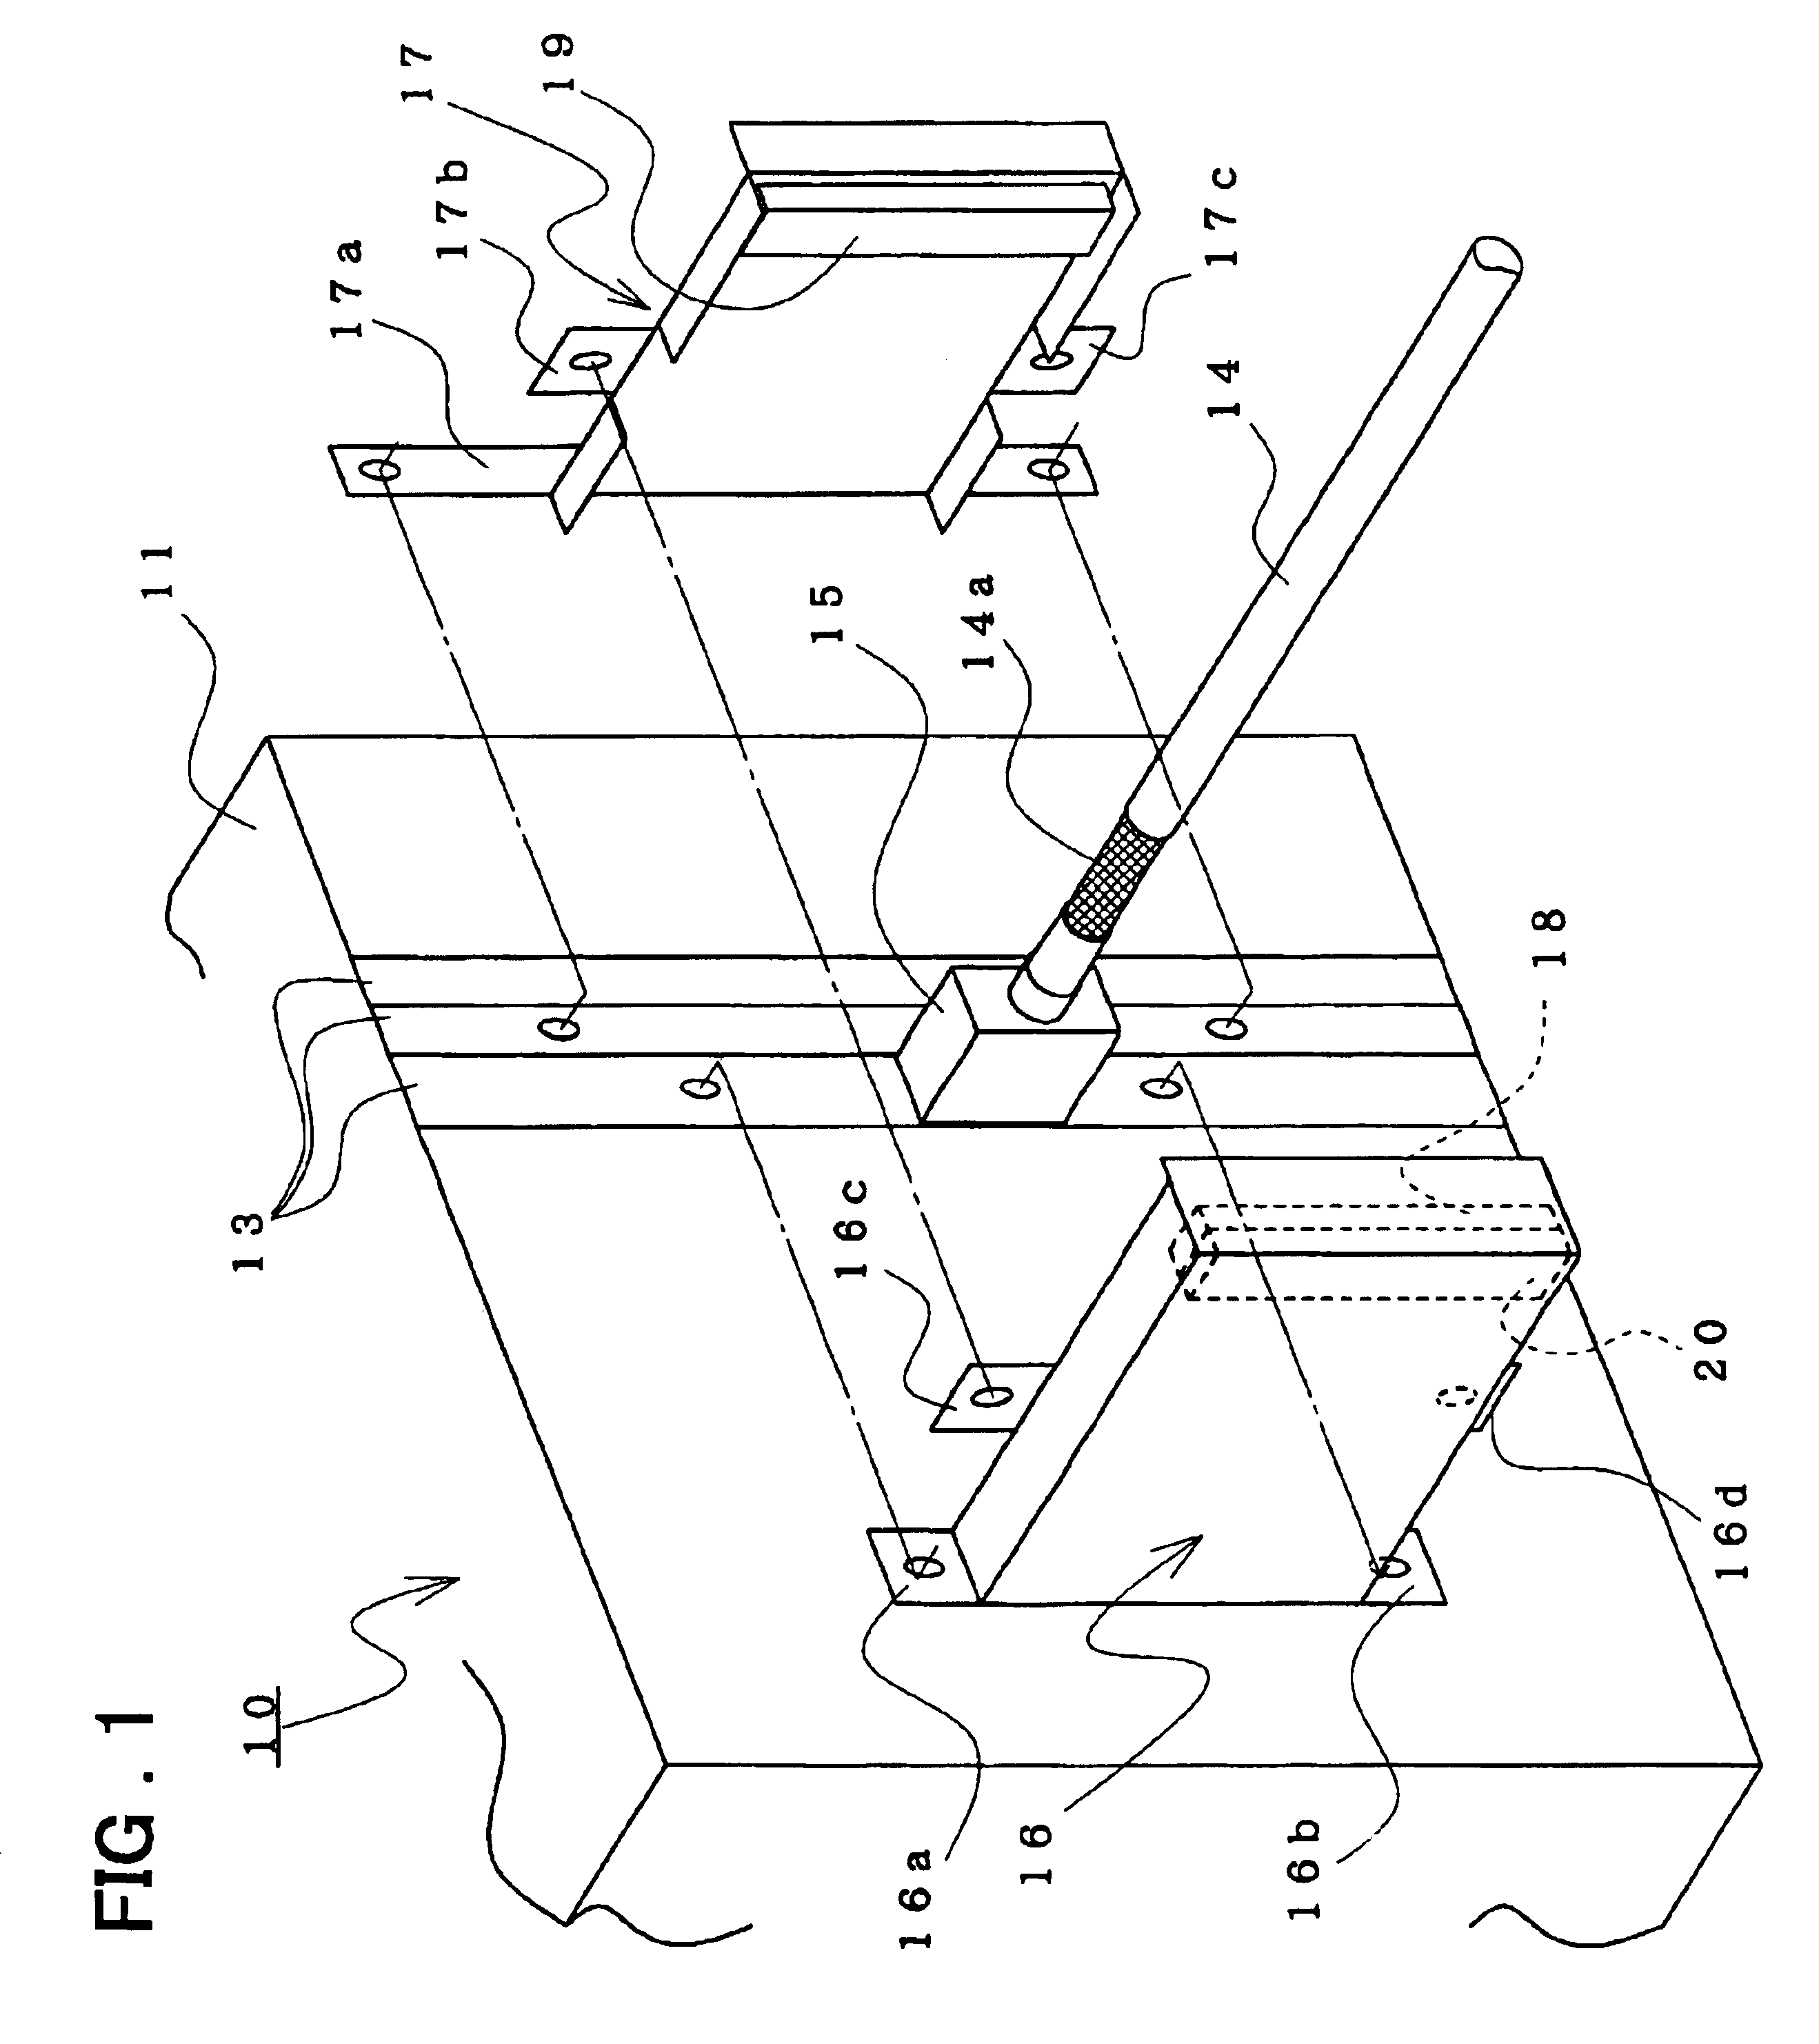 Noise suppressing structure for shielded cable